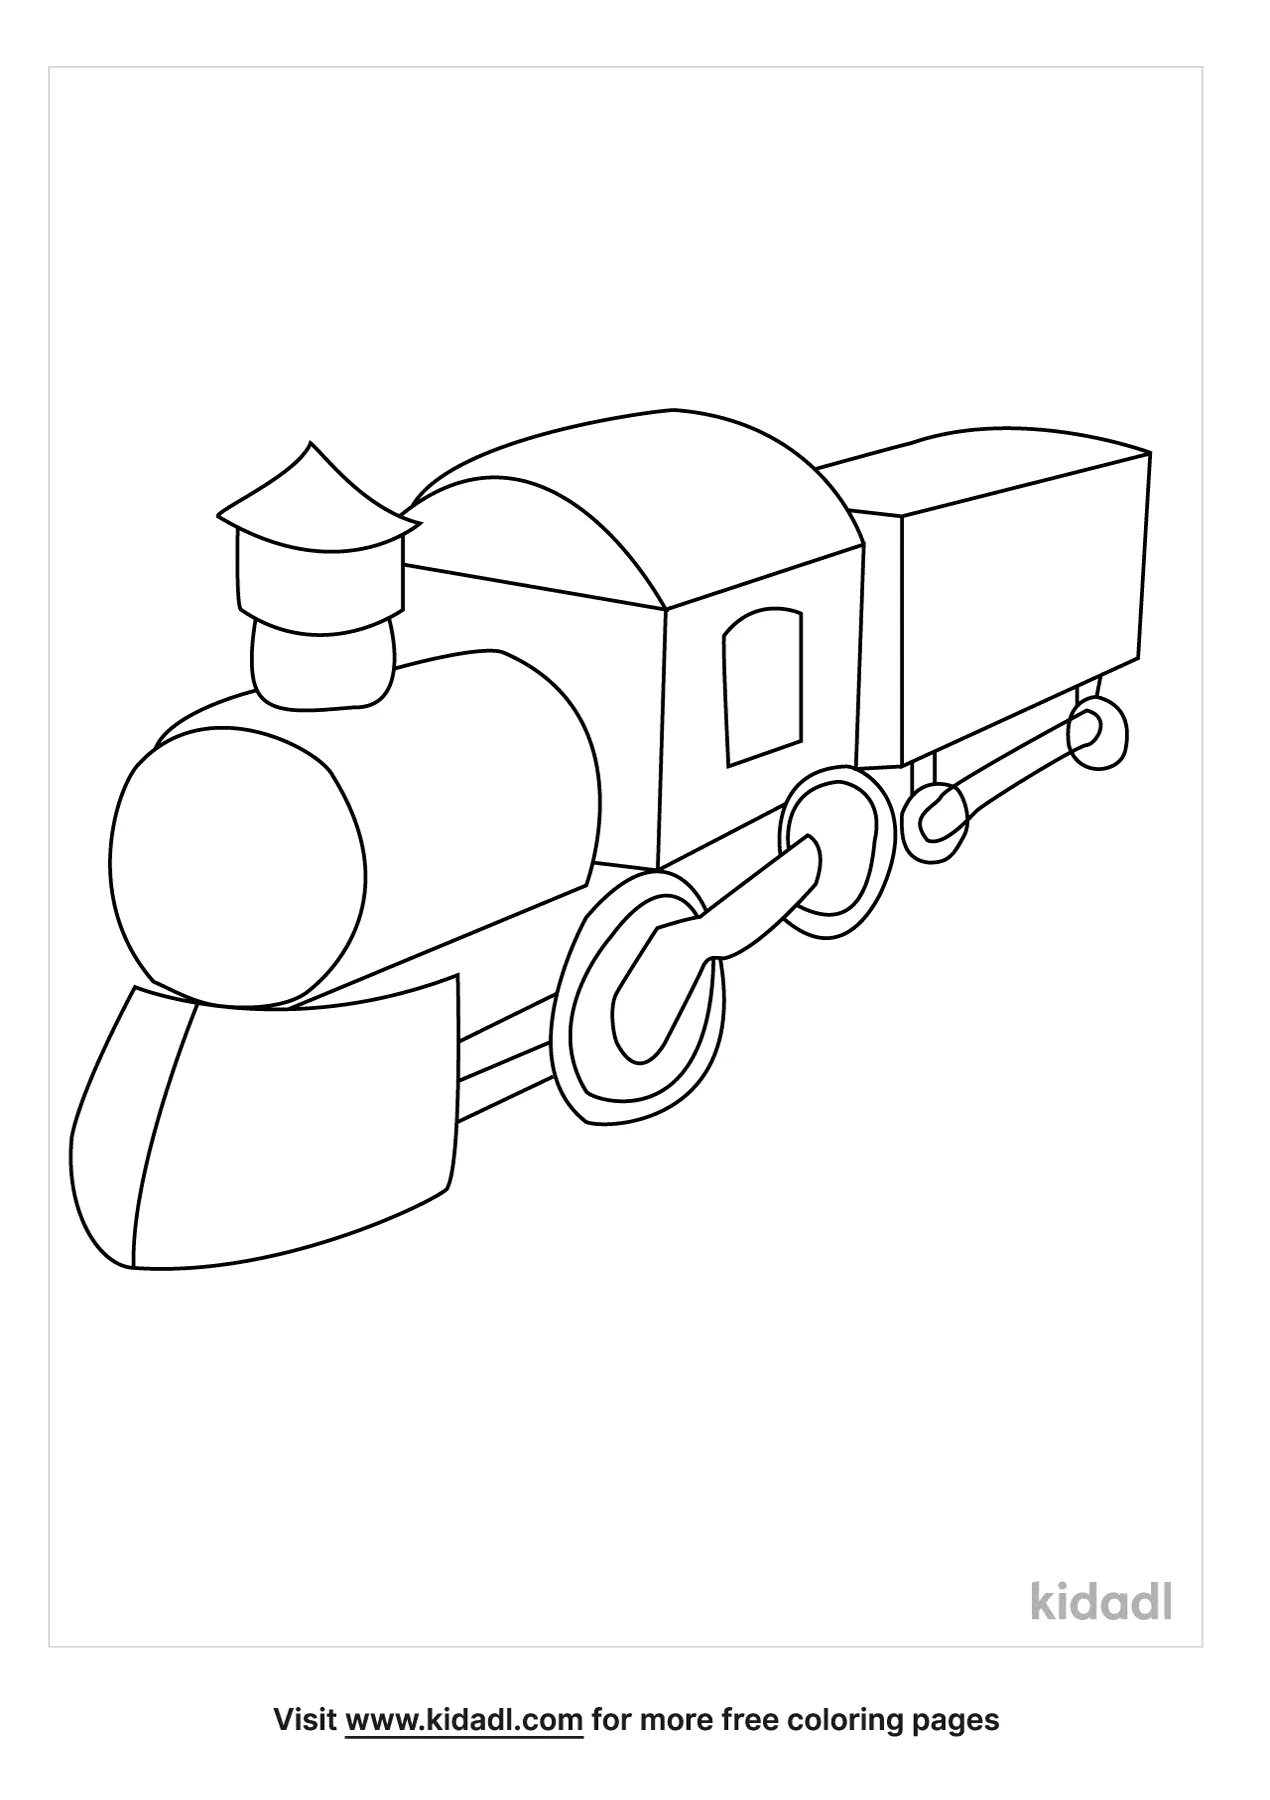 Wheels On The Train Coloring Page